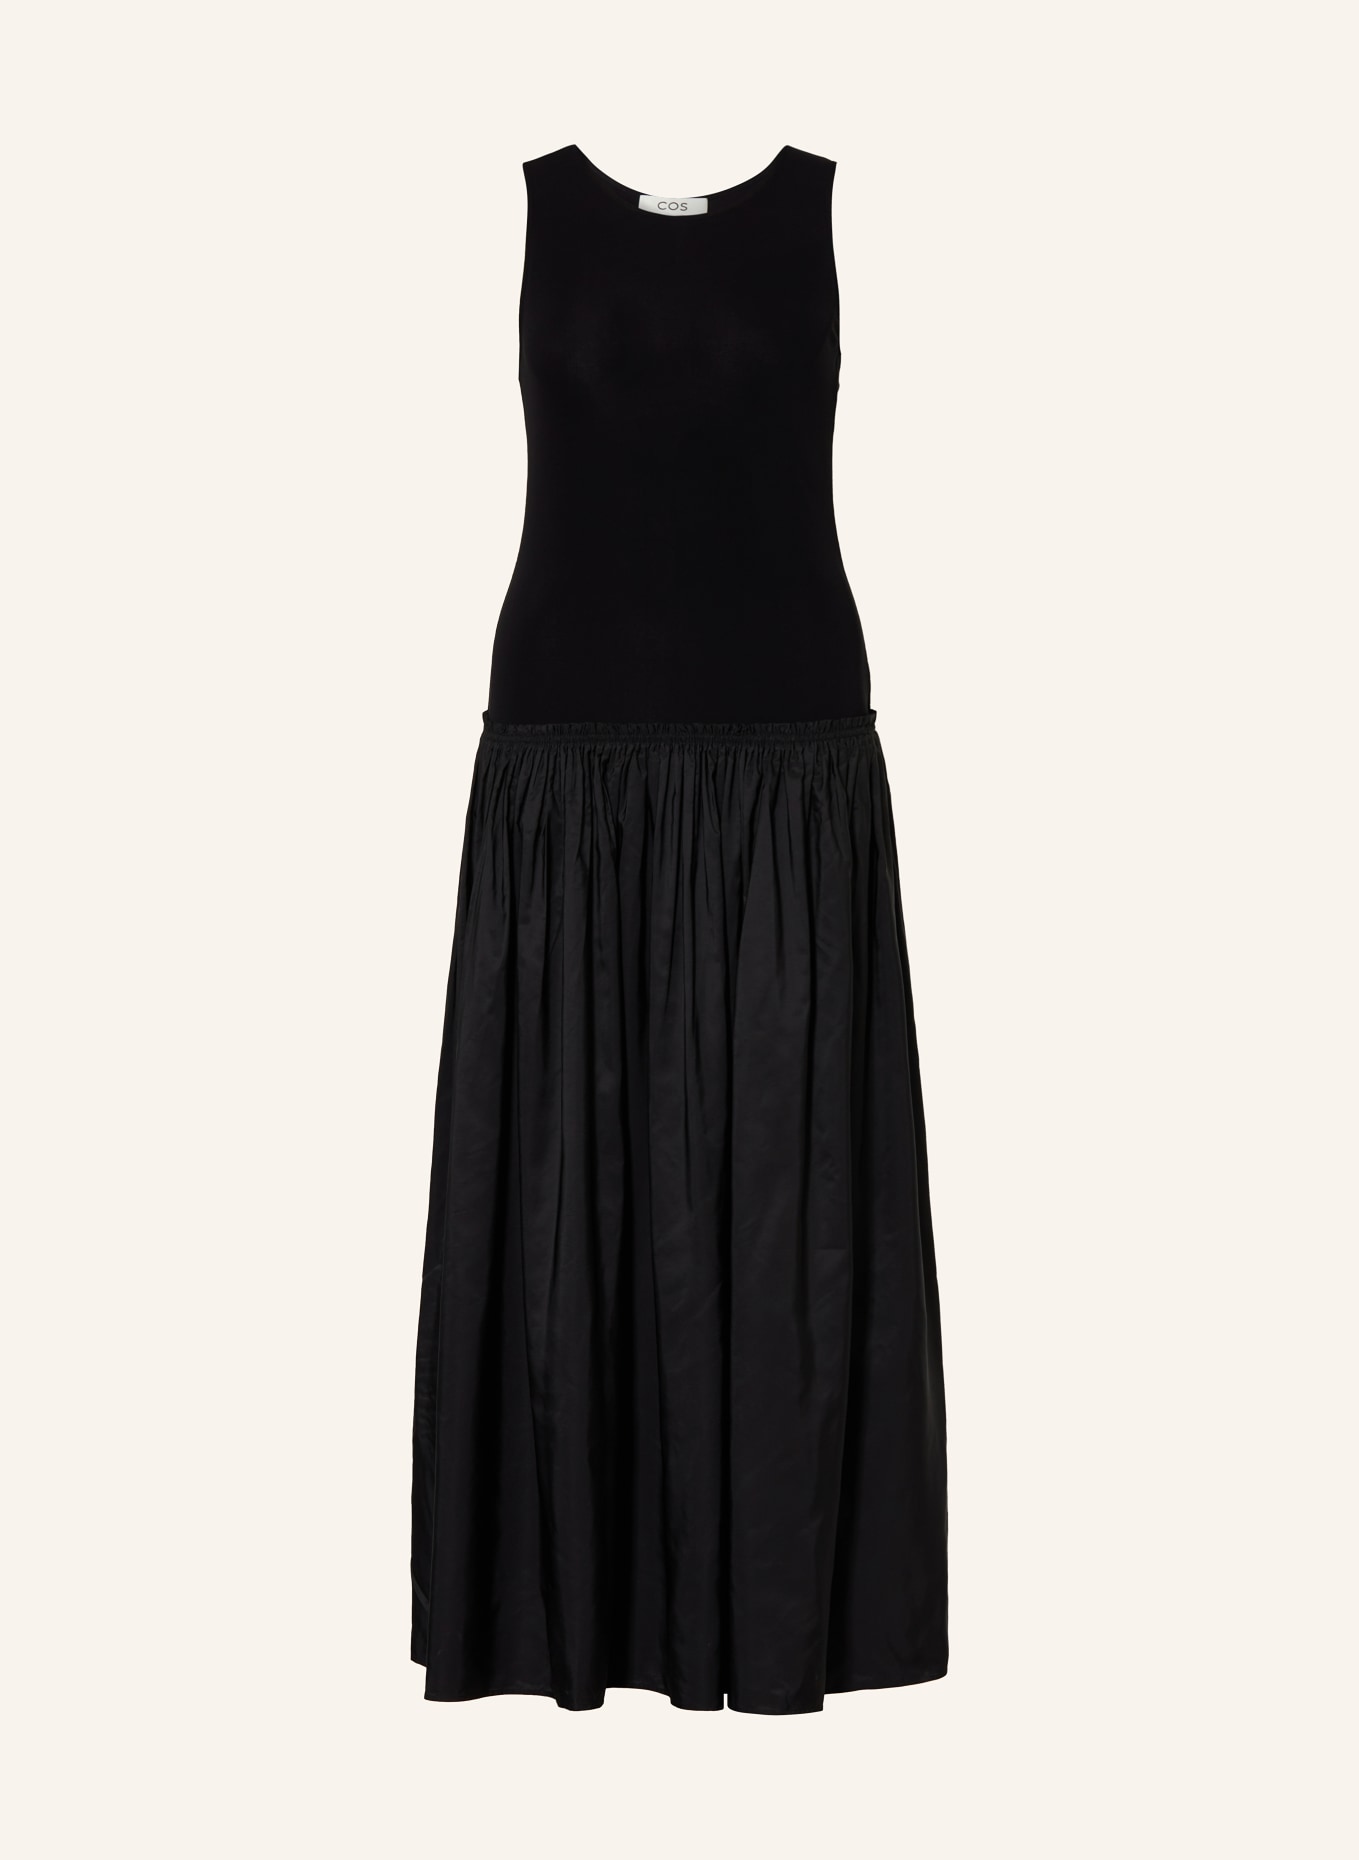 COS Dress in mixed materials, Color: BLACK (Image 1)